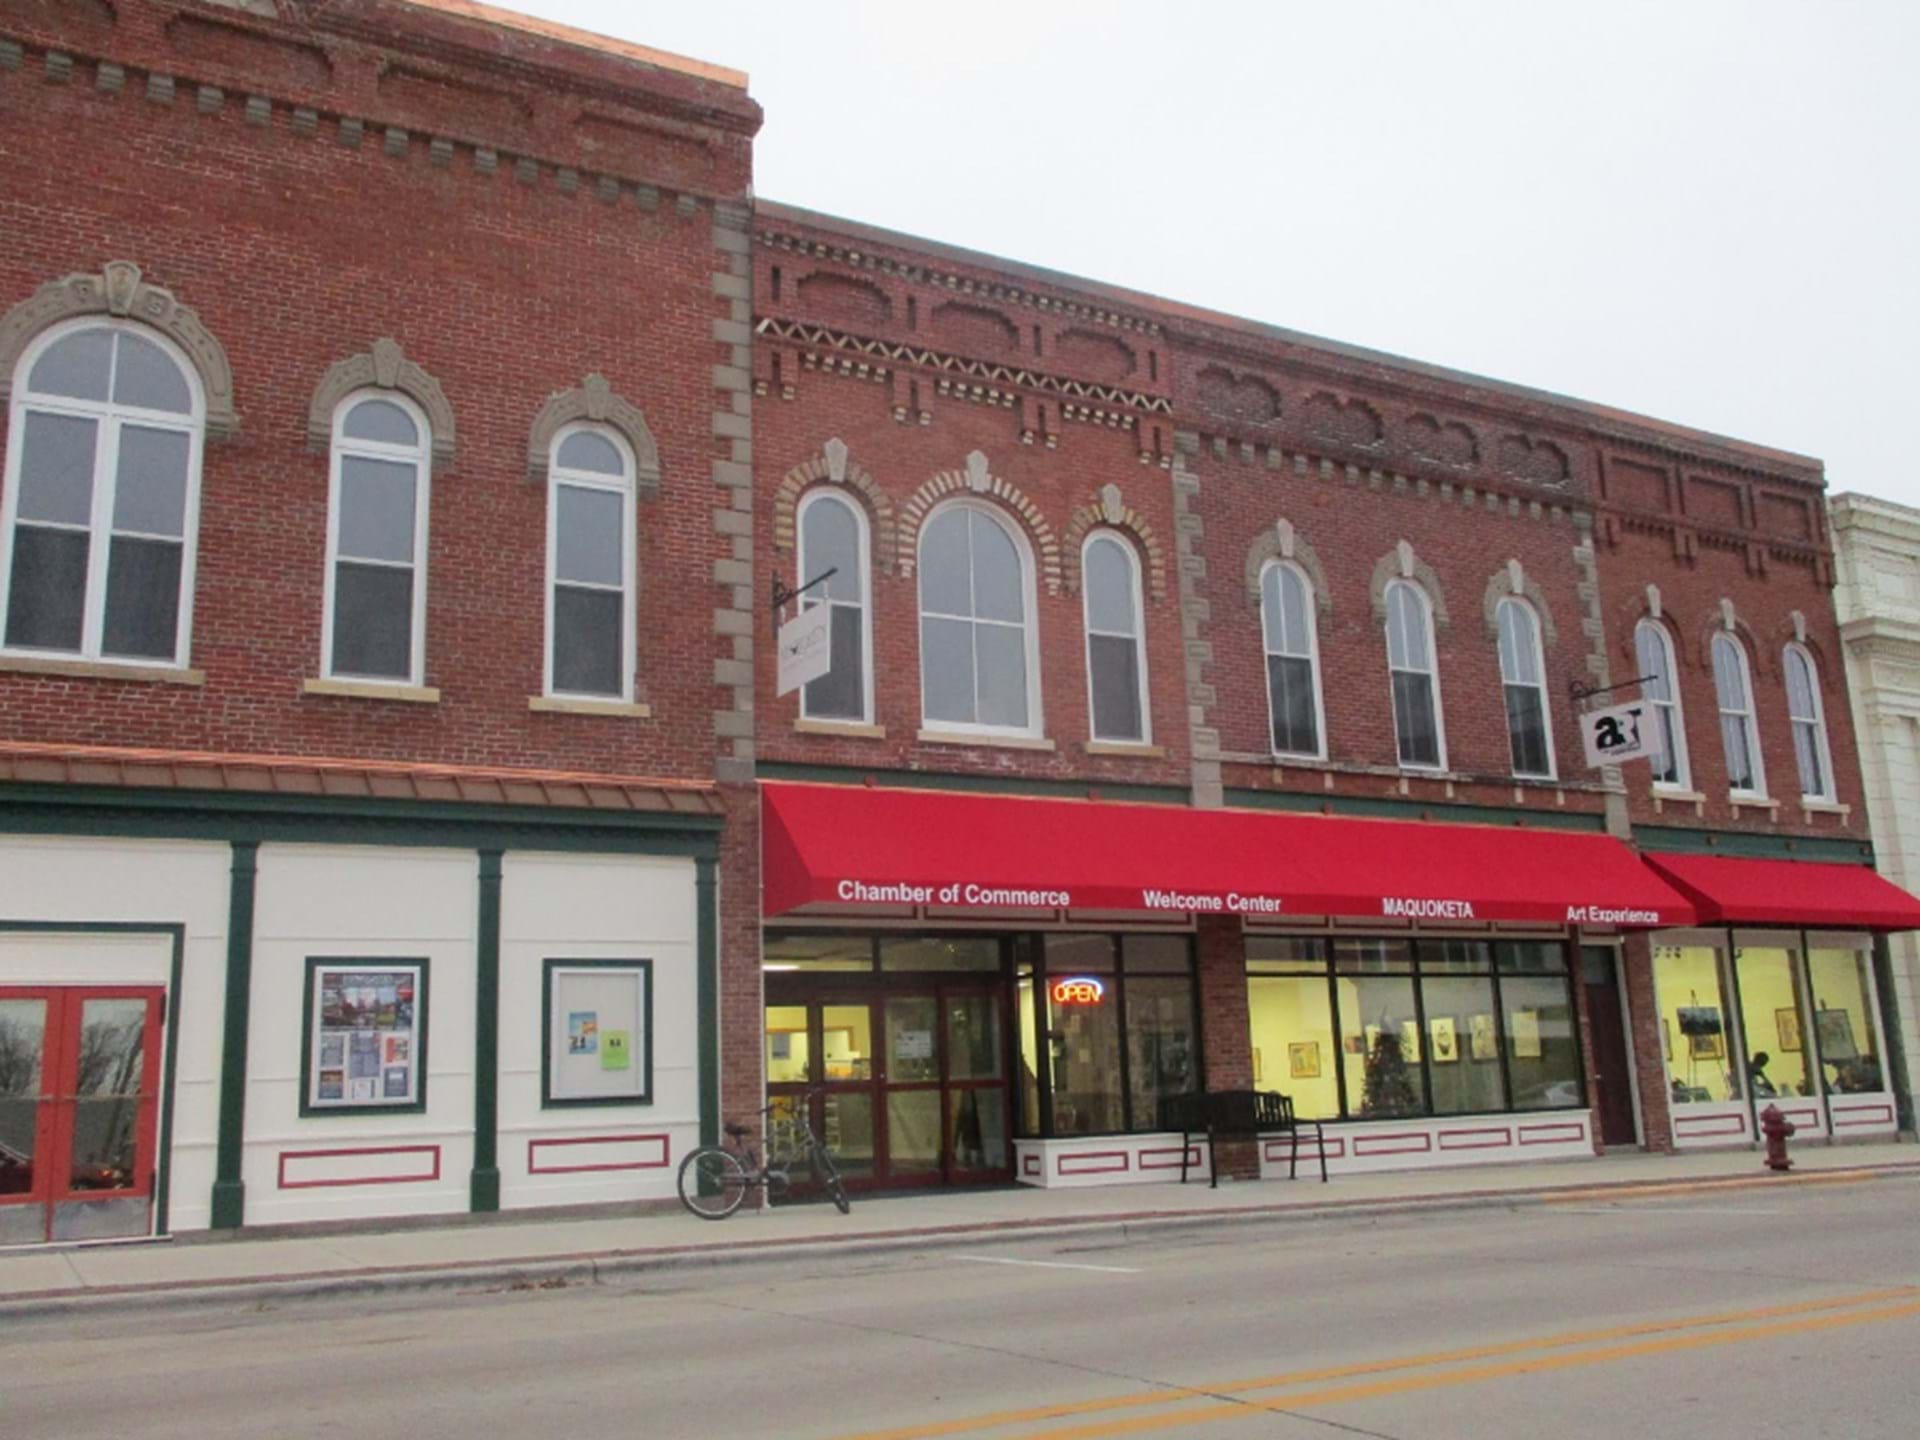 Contact the Maquoketa Area Chamber of Commerce for details on what to do and see in and around Maquoketa, Iowa.  Maquoketa is a great place to call home, expand or start a new business!